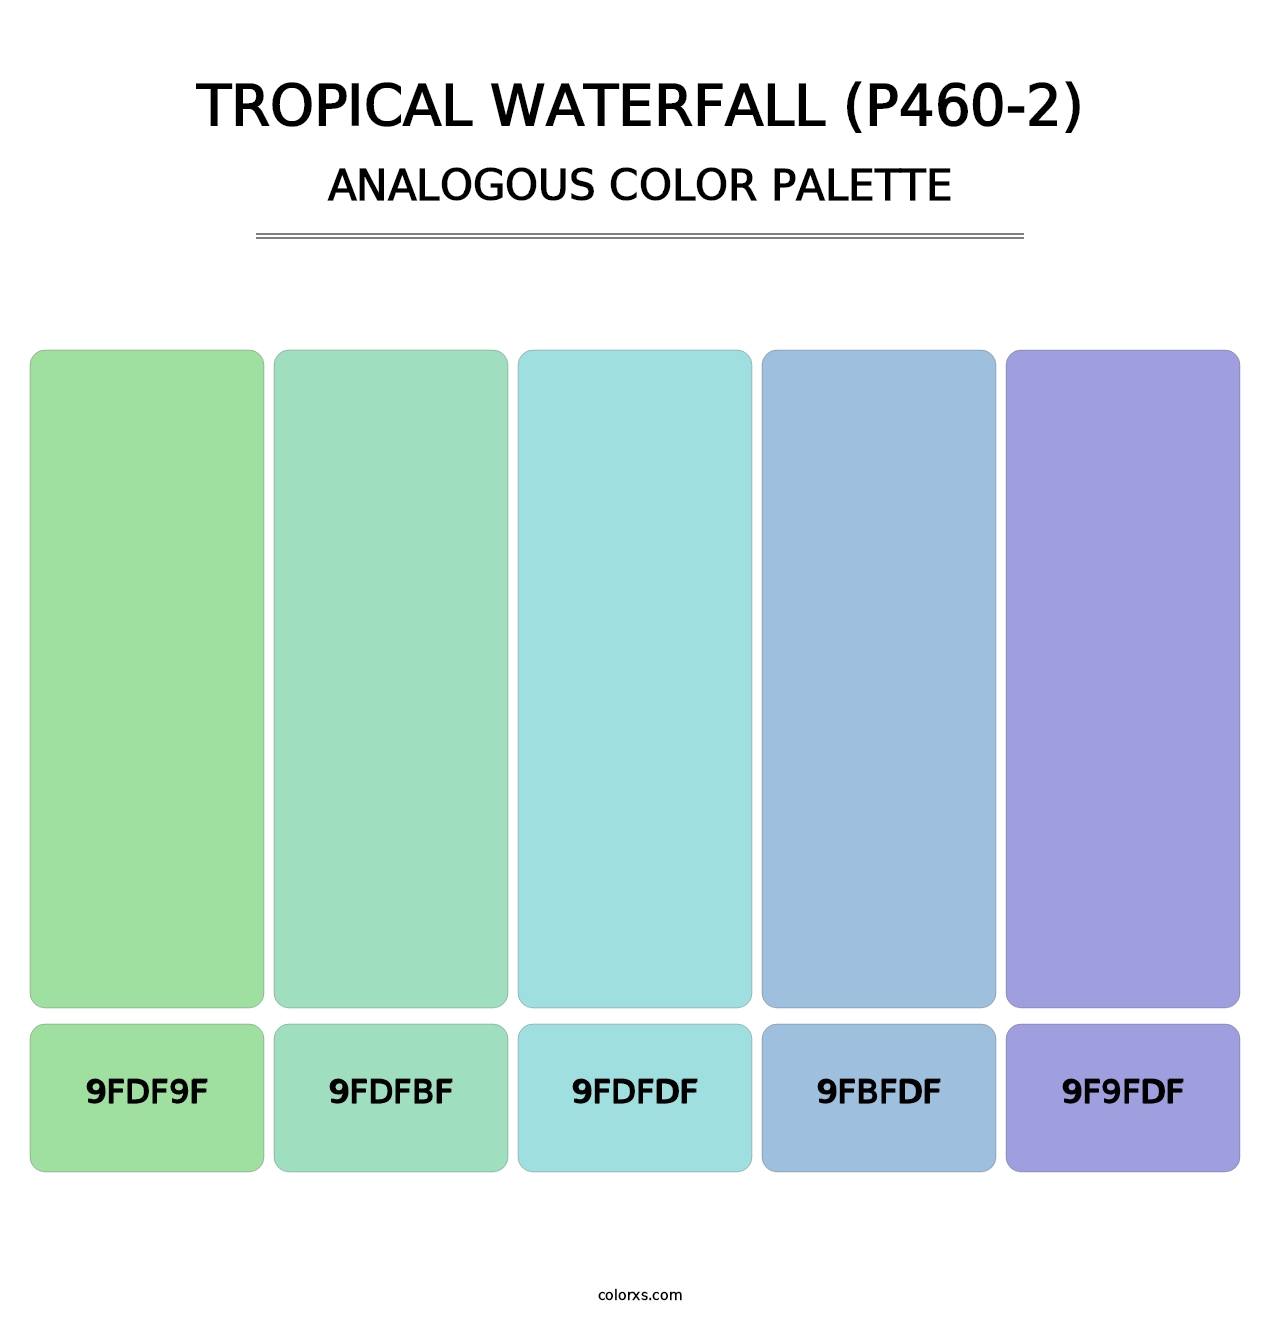 Tropical Waterfall (P460-2) - Analogous Color Palette